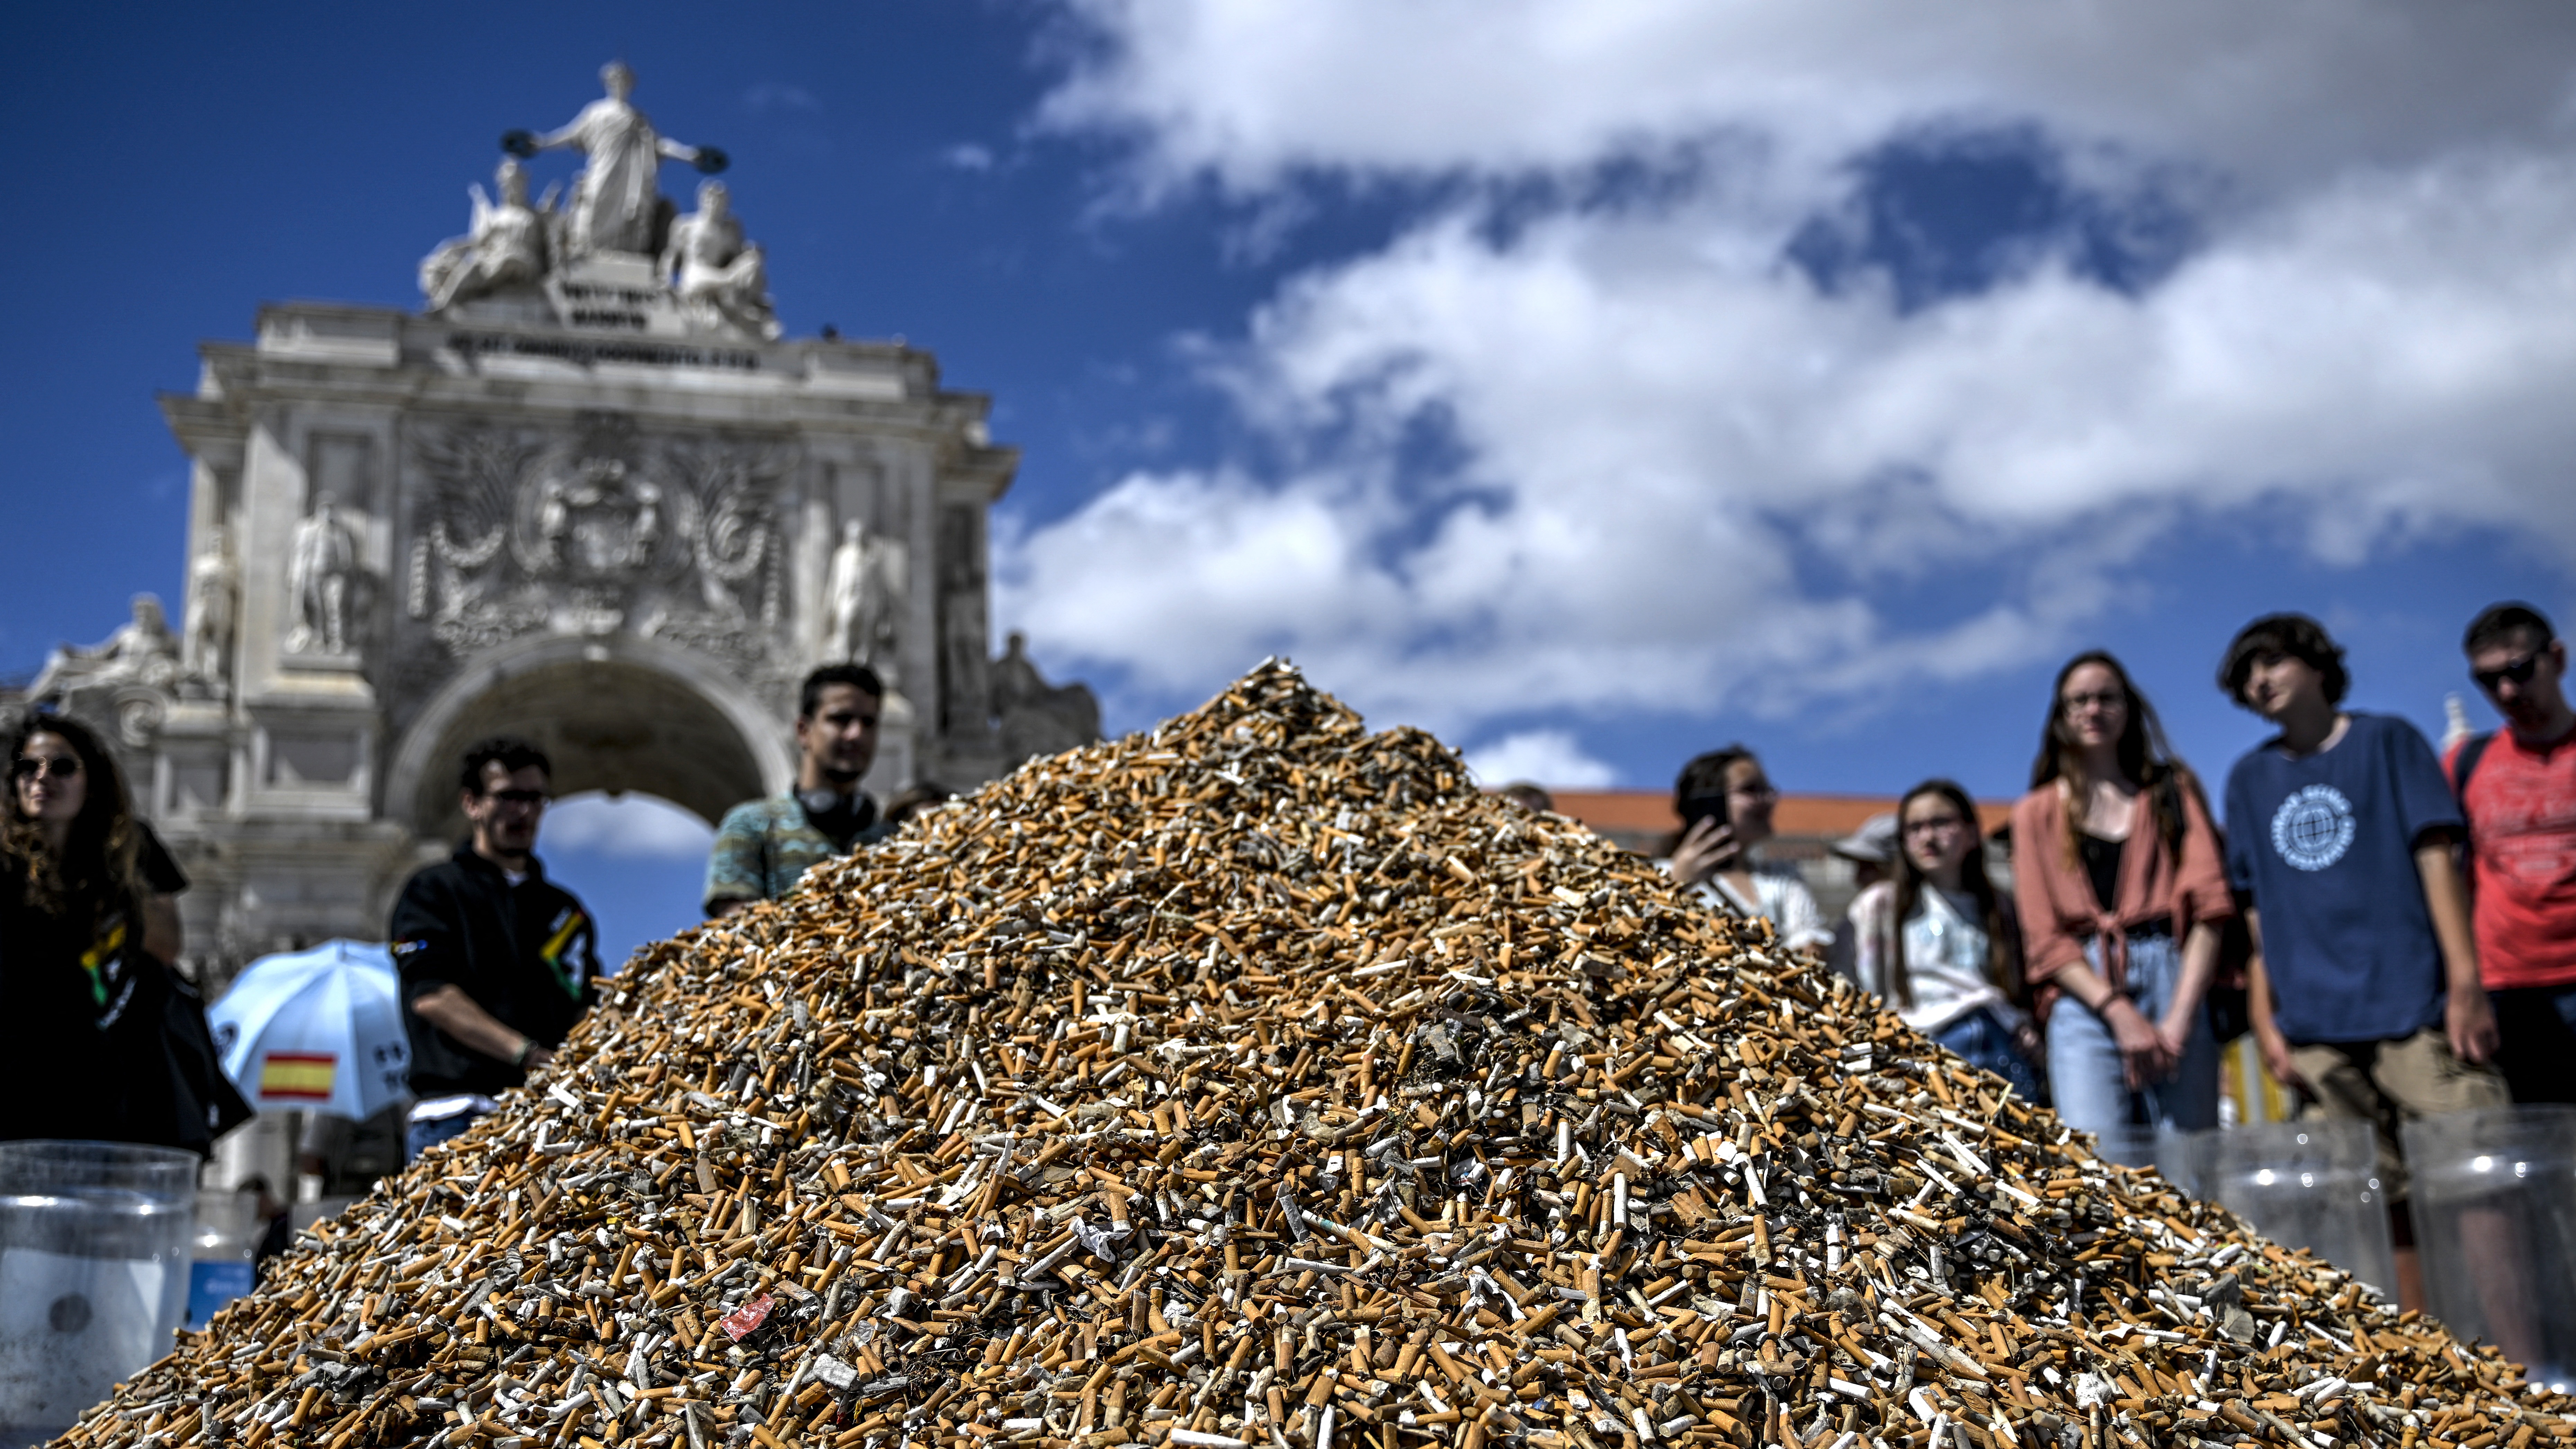 Onlookers gaze at a pile of cigarette butts, collected in one week, at Lisbon's Comercio square. /Patricia de Melo Moreira/AFP